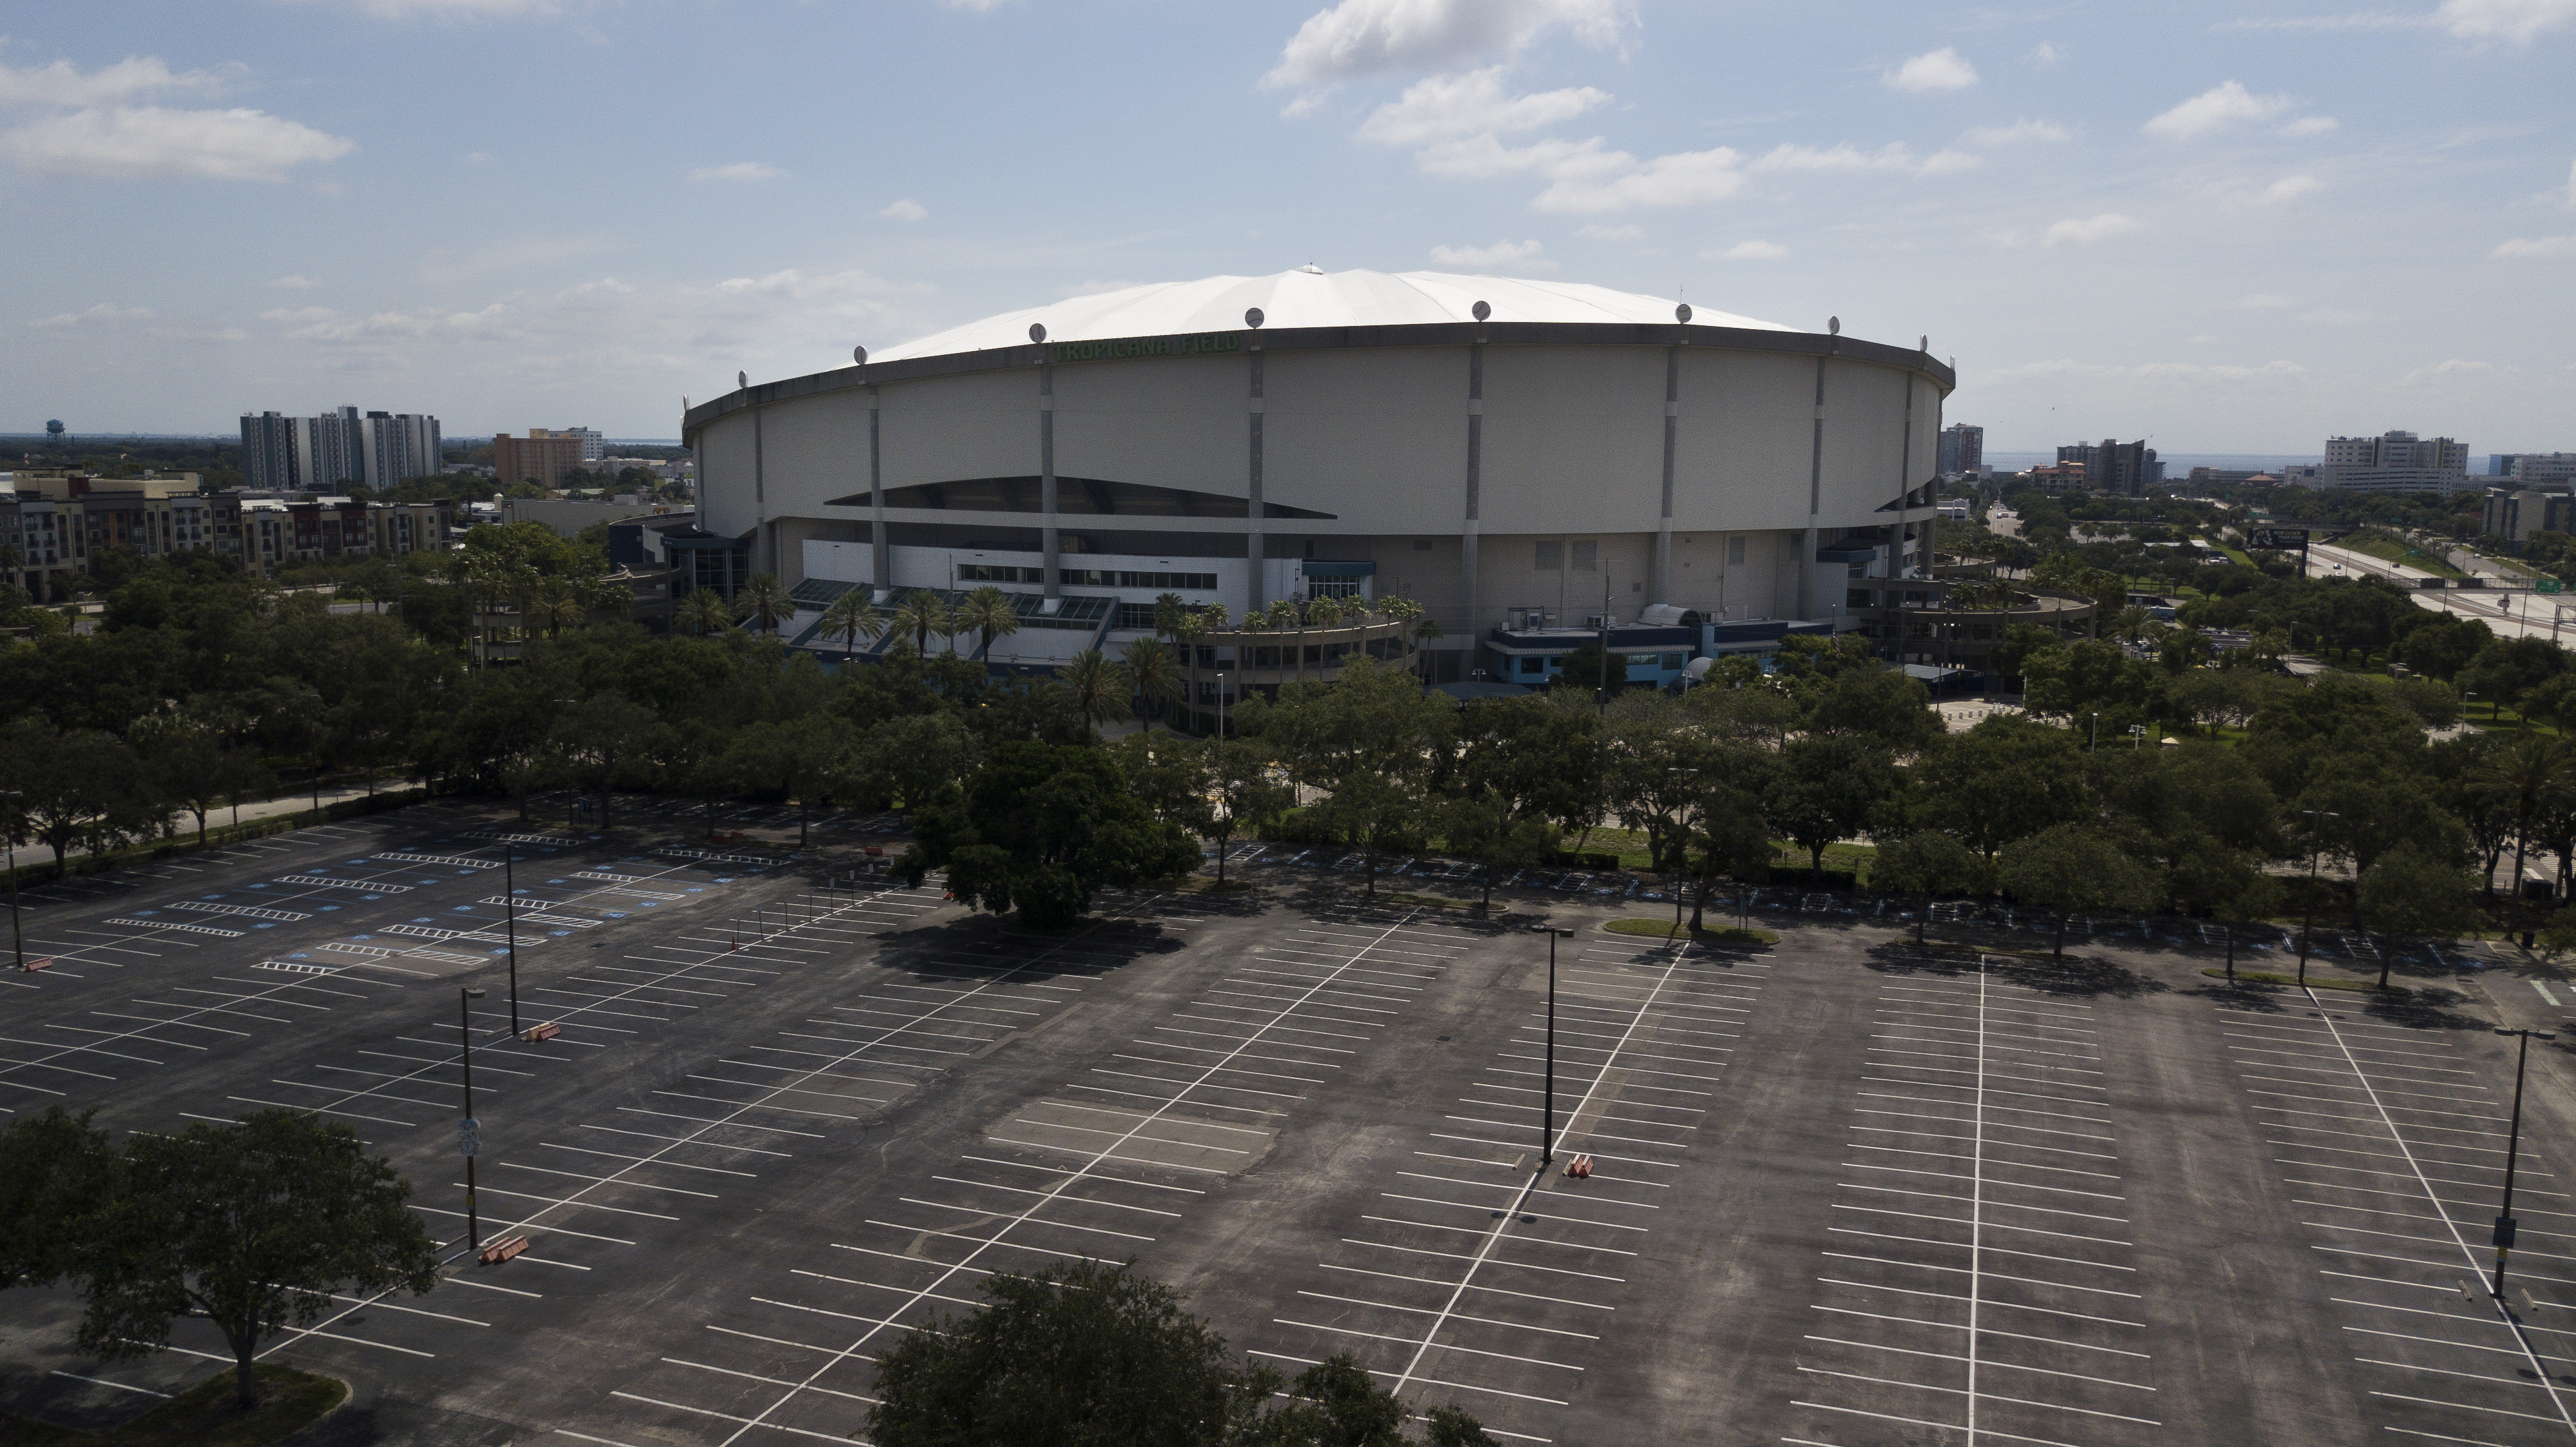 3 possible graves found under parking lots at Tampa Bay Rays